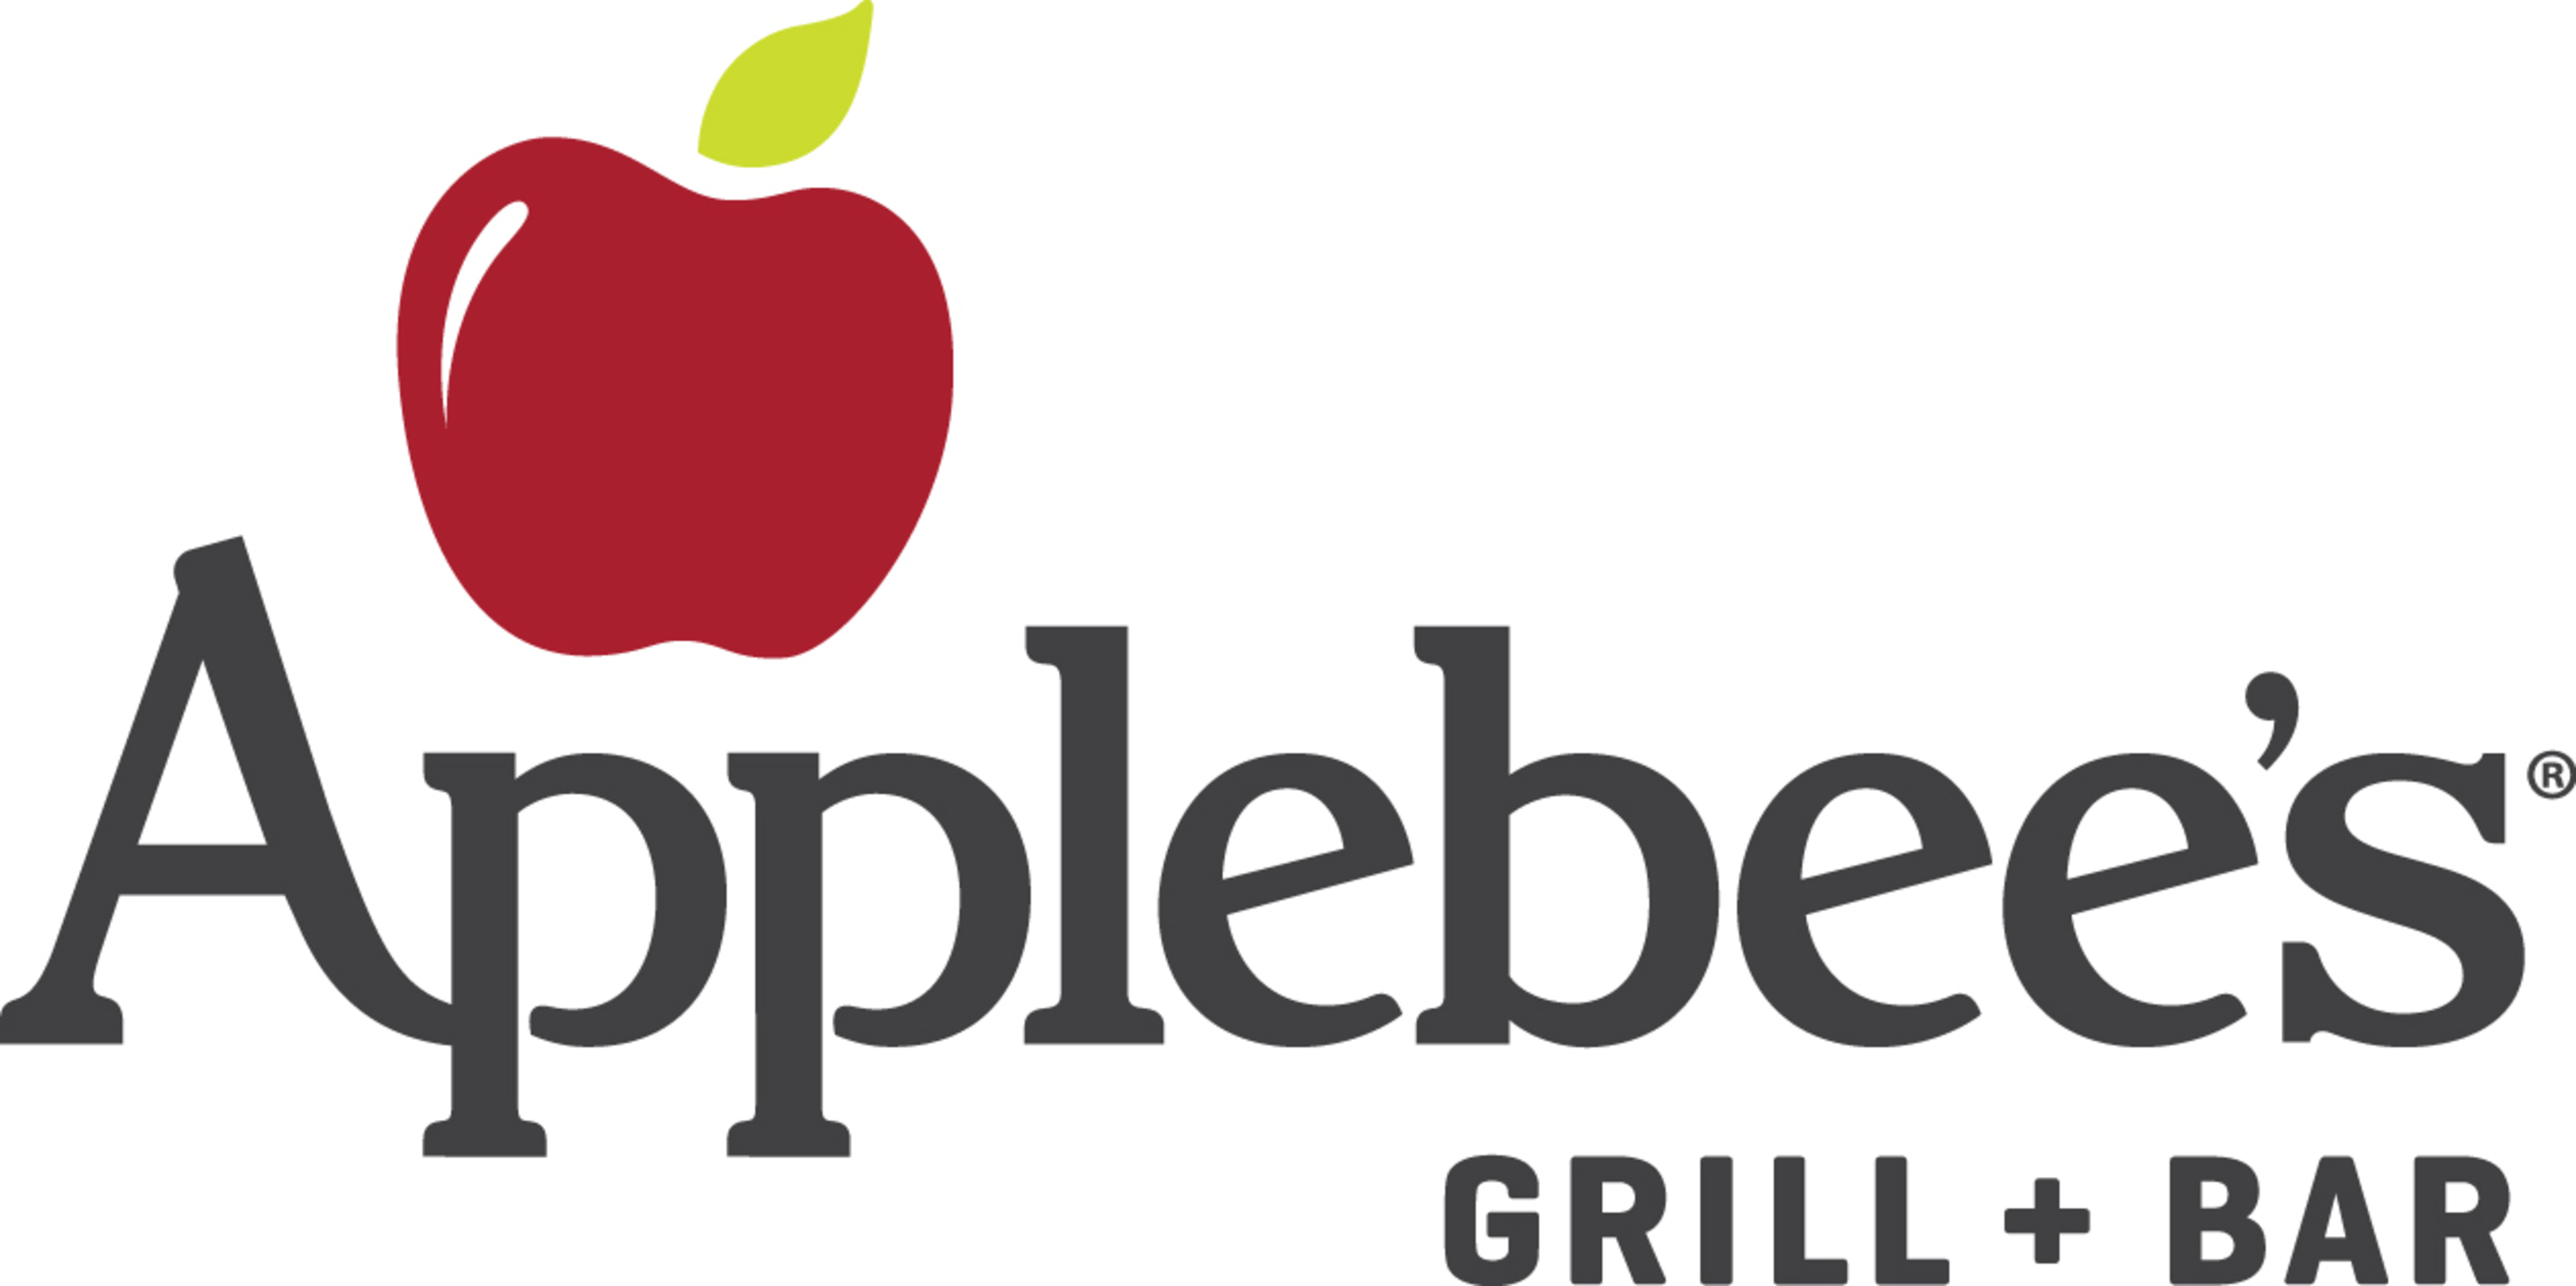 Applebees | Select a free meal from a limited menu on Veterans Day.